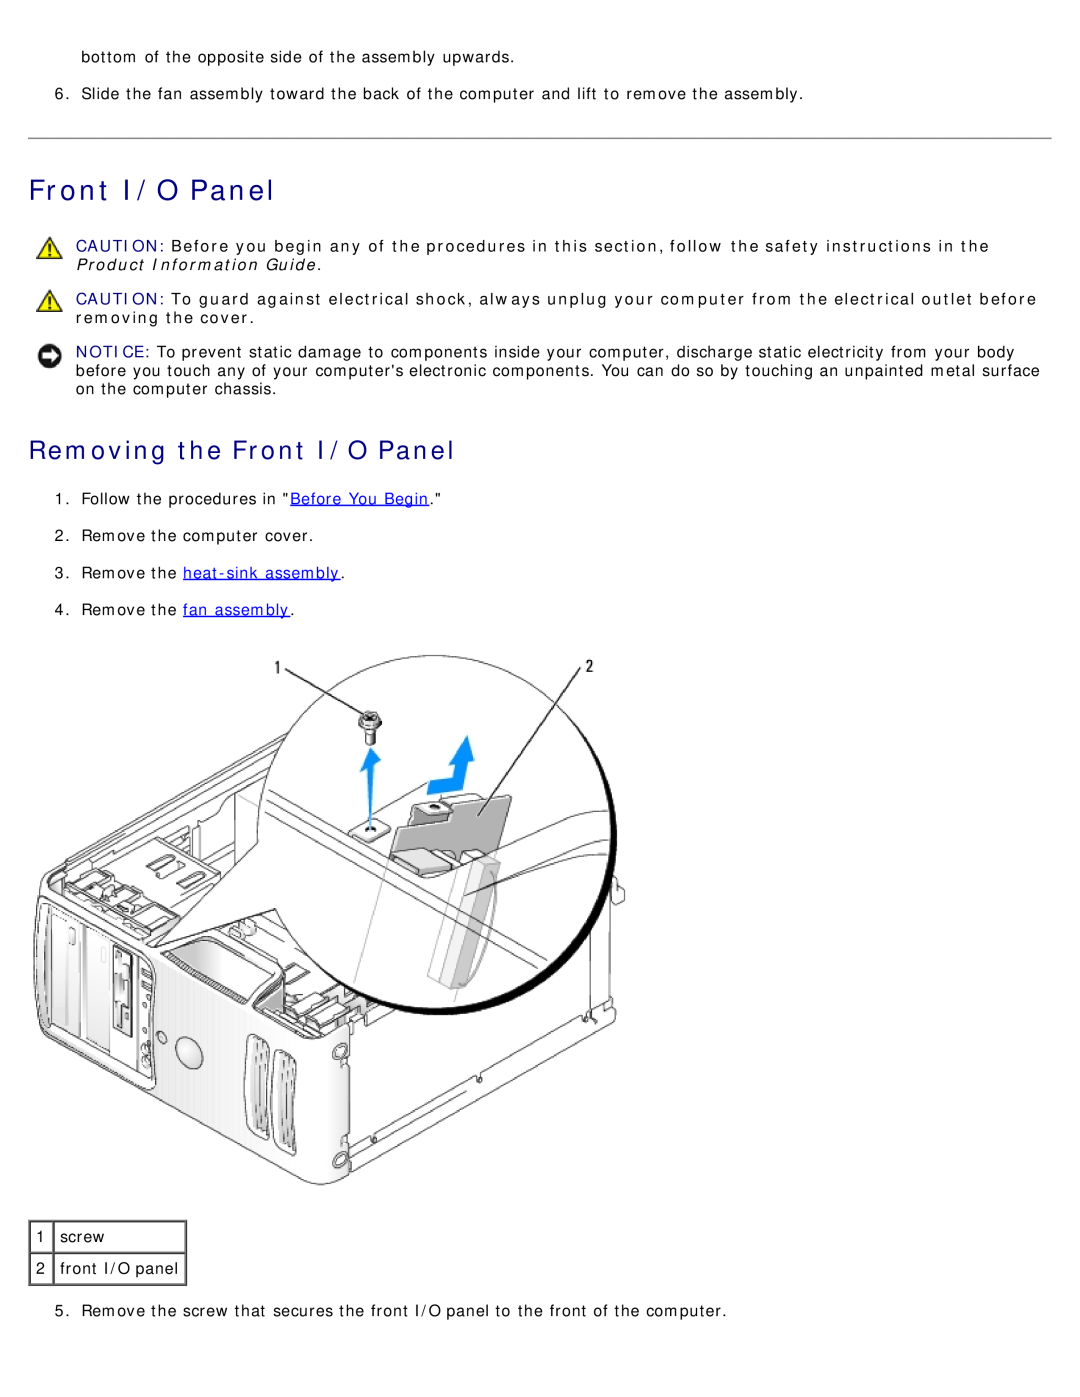 Dell DCSM manual Removing the Front I/O Panel, Remove the heat-sink assembly 